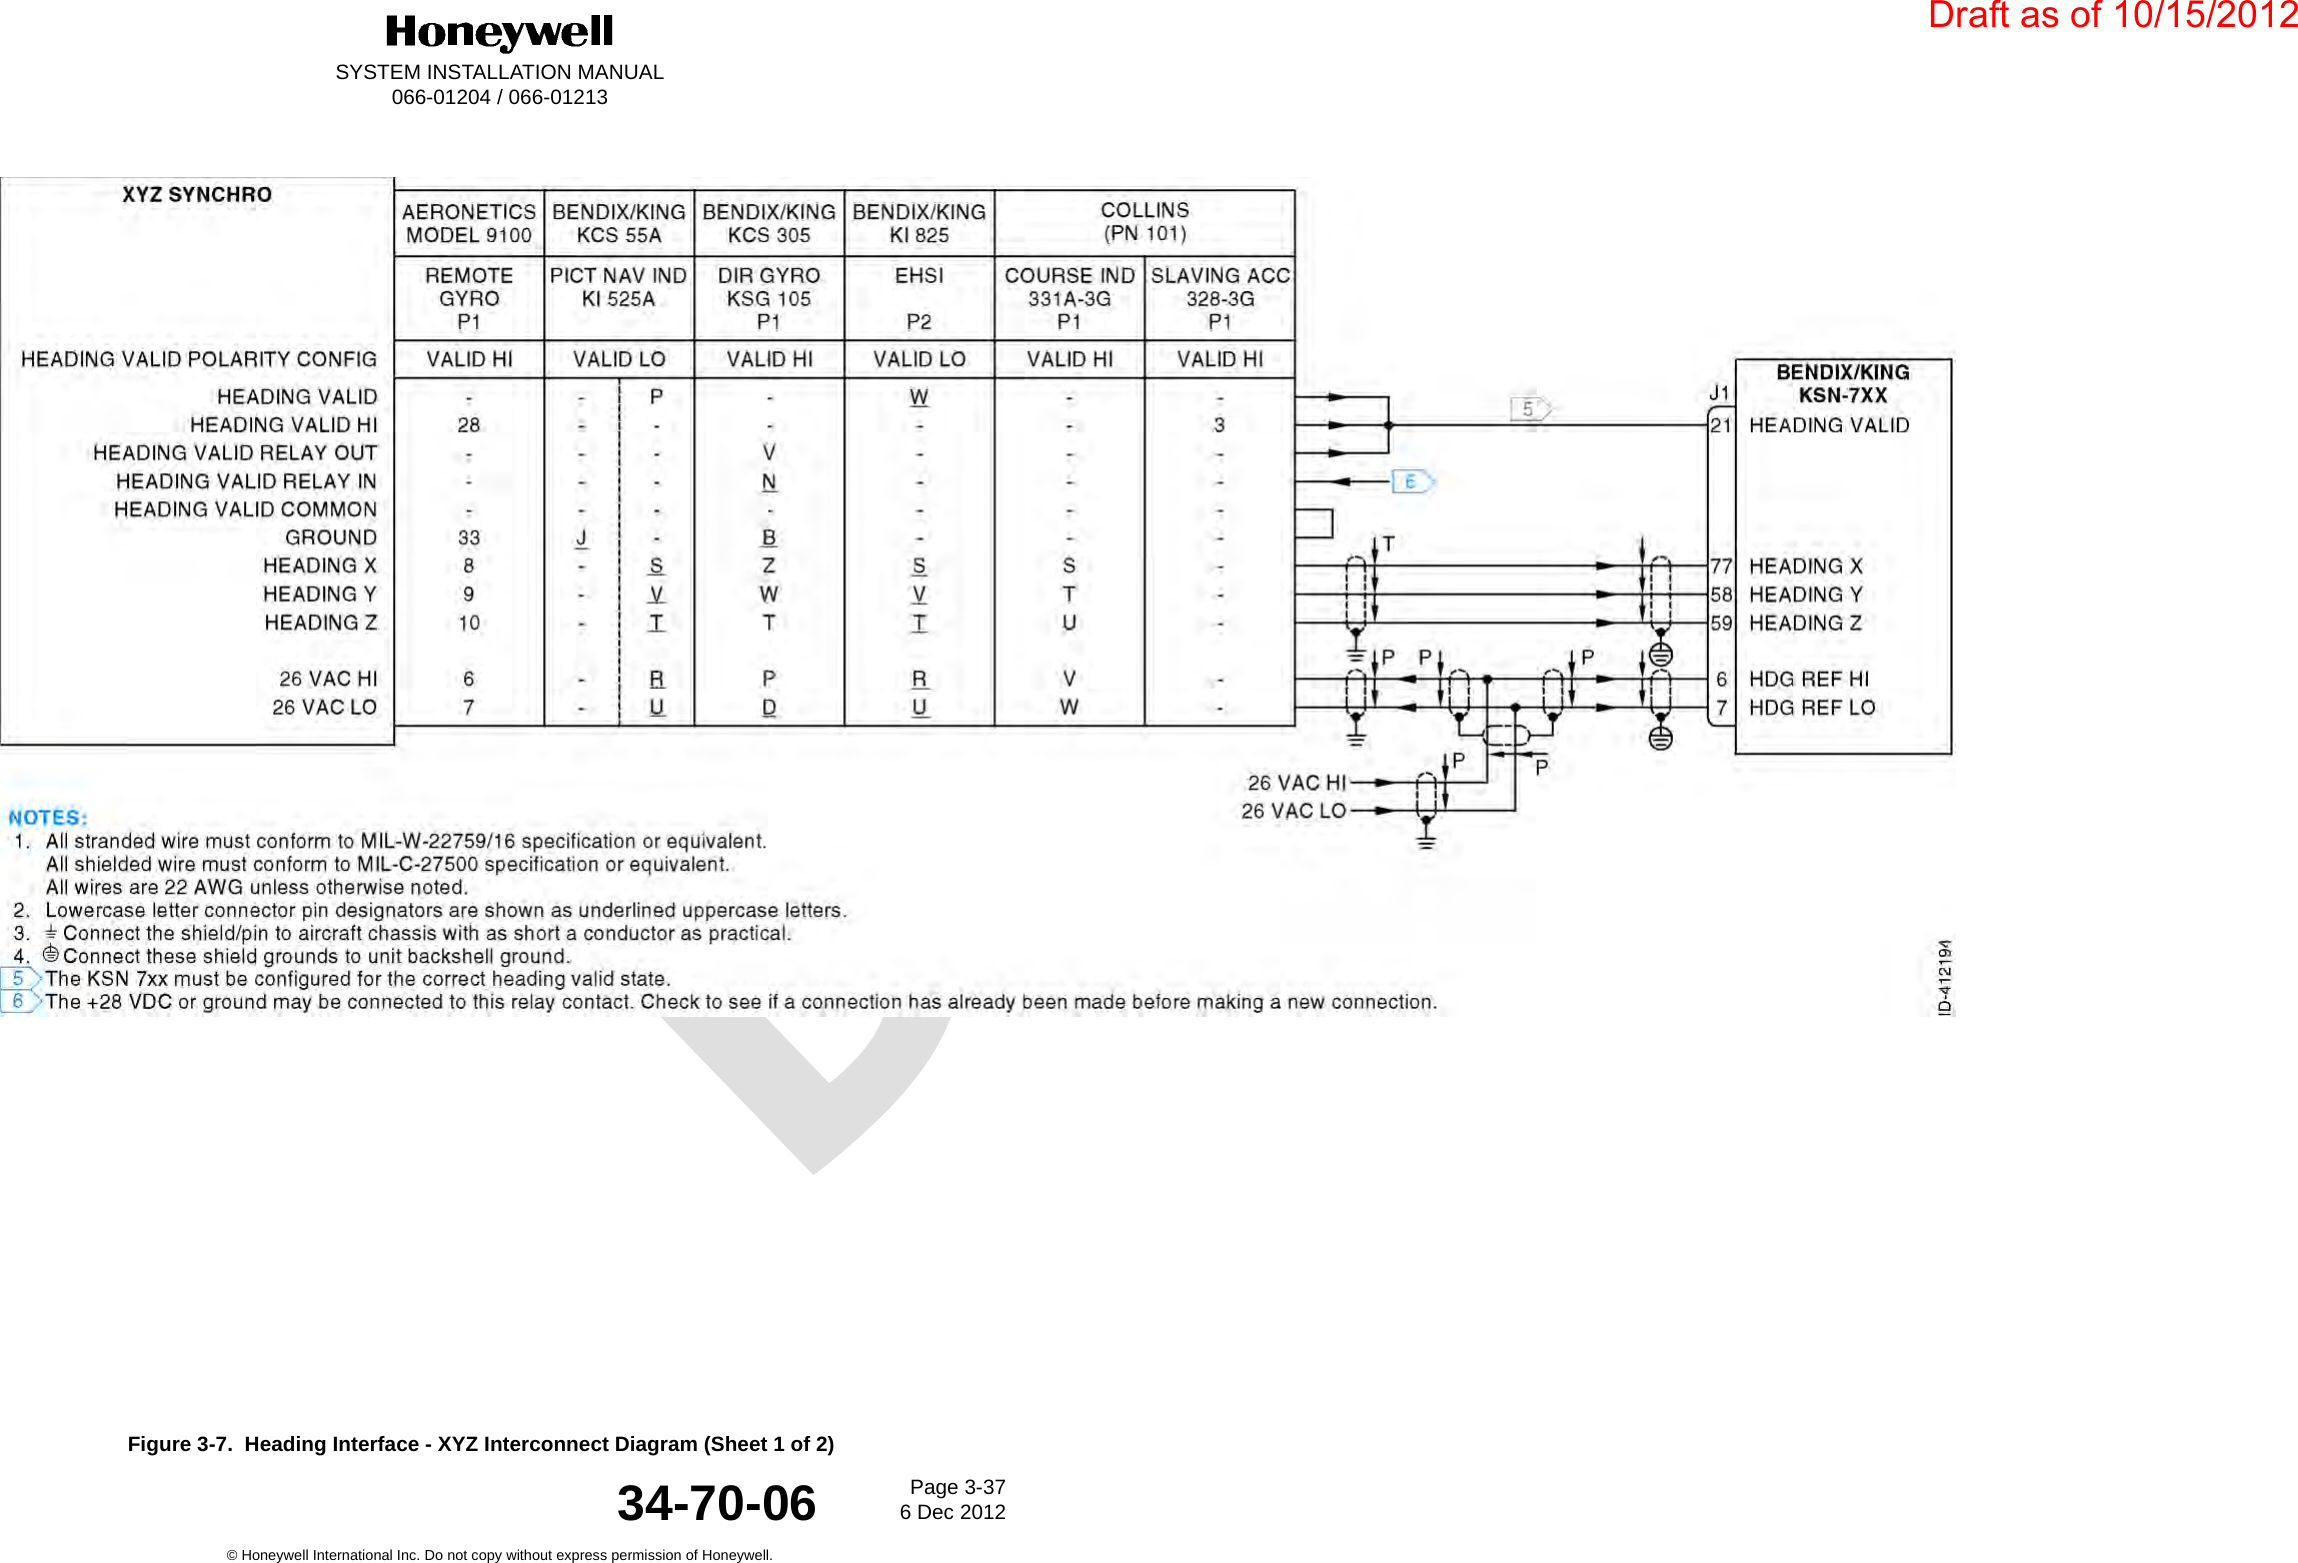 DraftSYSTEM INSTALLATION MANUAL066-01204 / 066-01213Page 3-376 Dec 2012© Honeywell International Inc. Do not copy without express permission of Honeywell.34-70-06Figure 3-7.  Heading Interface - XYZ Interconnect Diagram (Sheet 1 of 2)Draft as of 10/15/2012